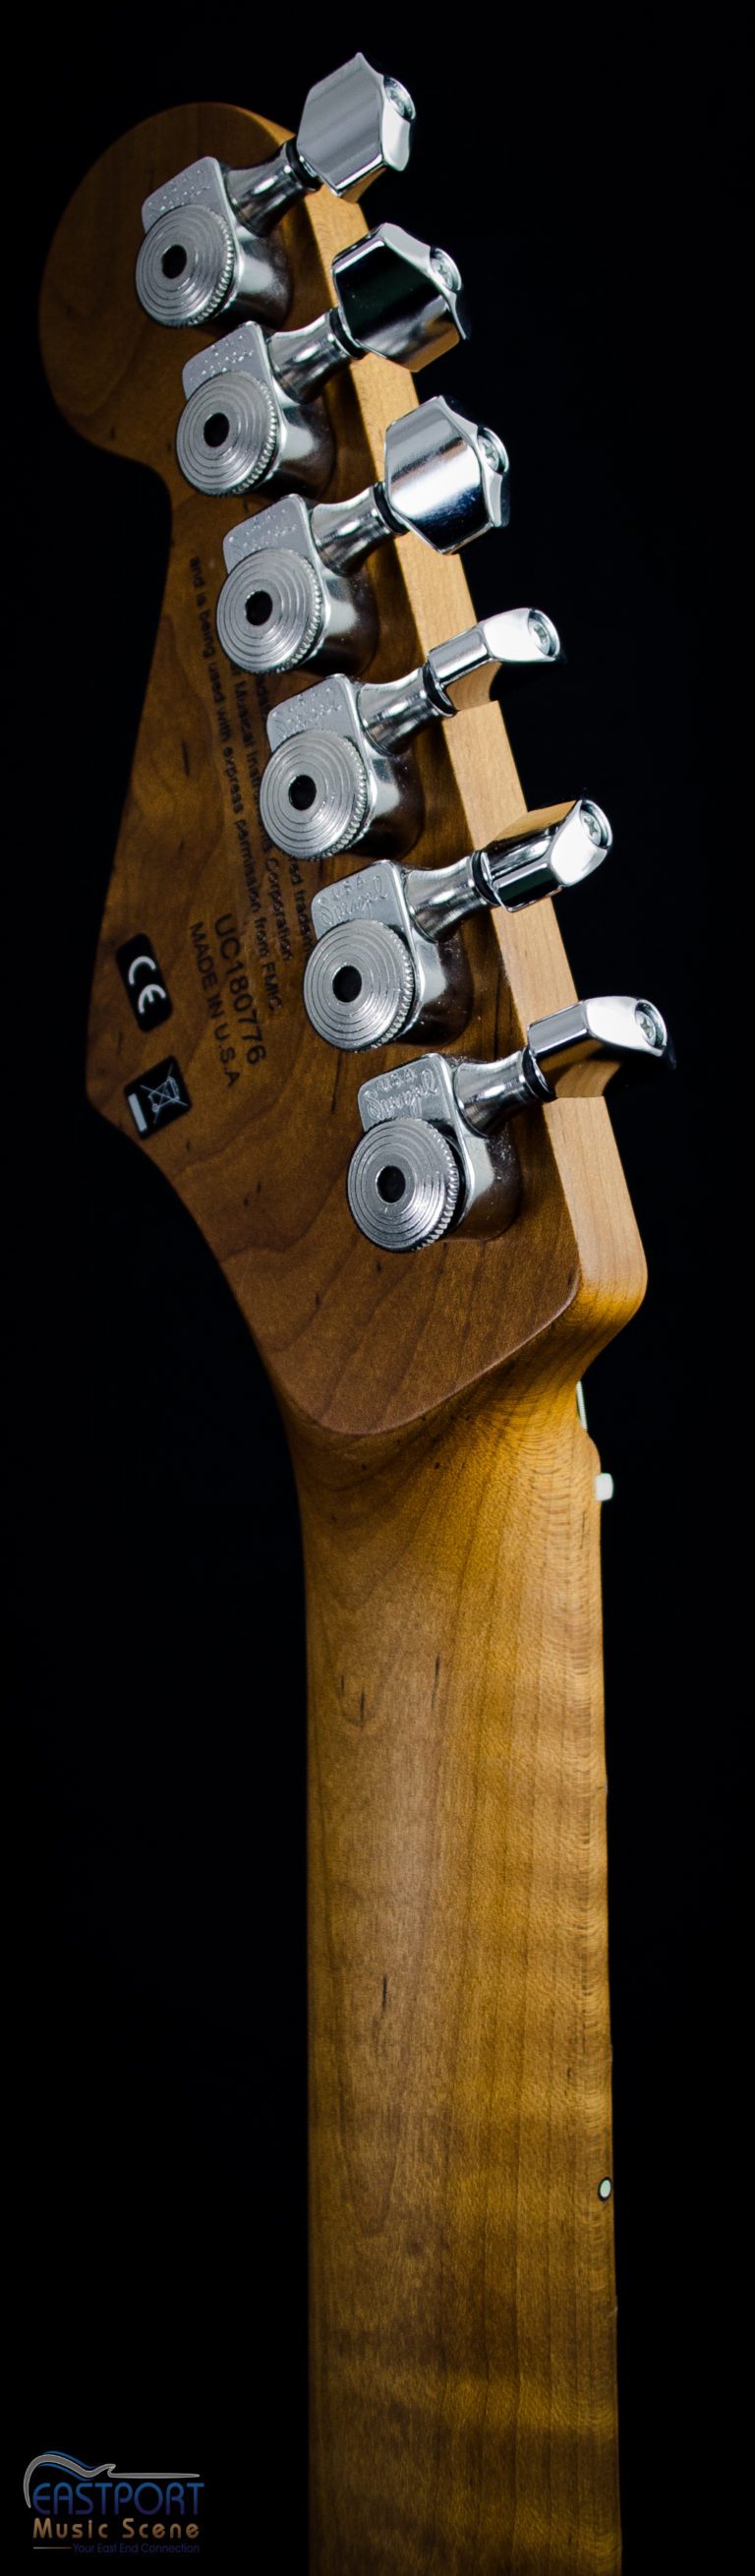 A close up of the back end of an electric guitar.